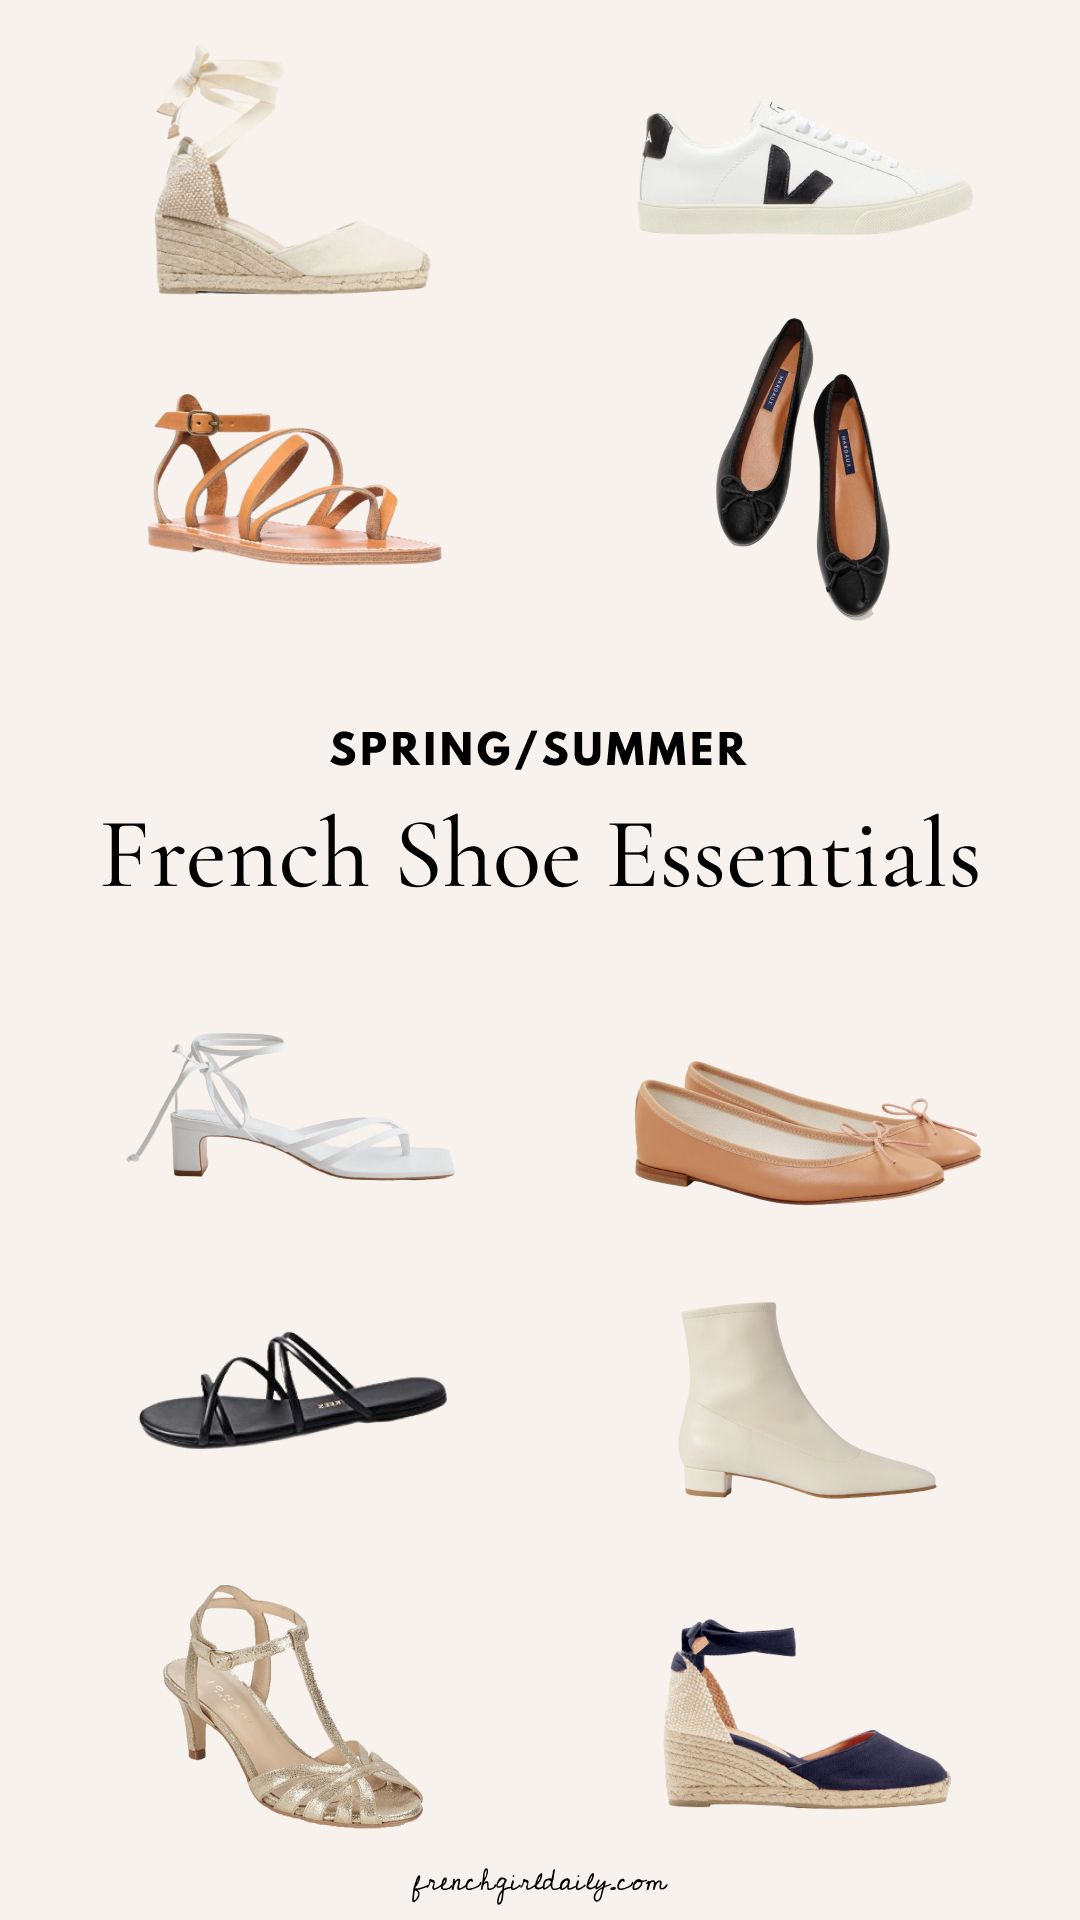 10 French Girl Spring/Summer Shoes